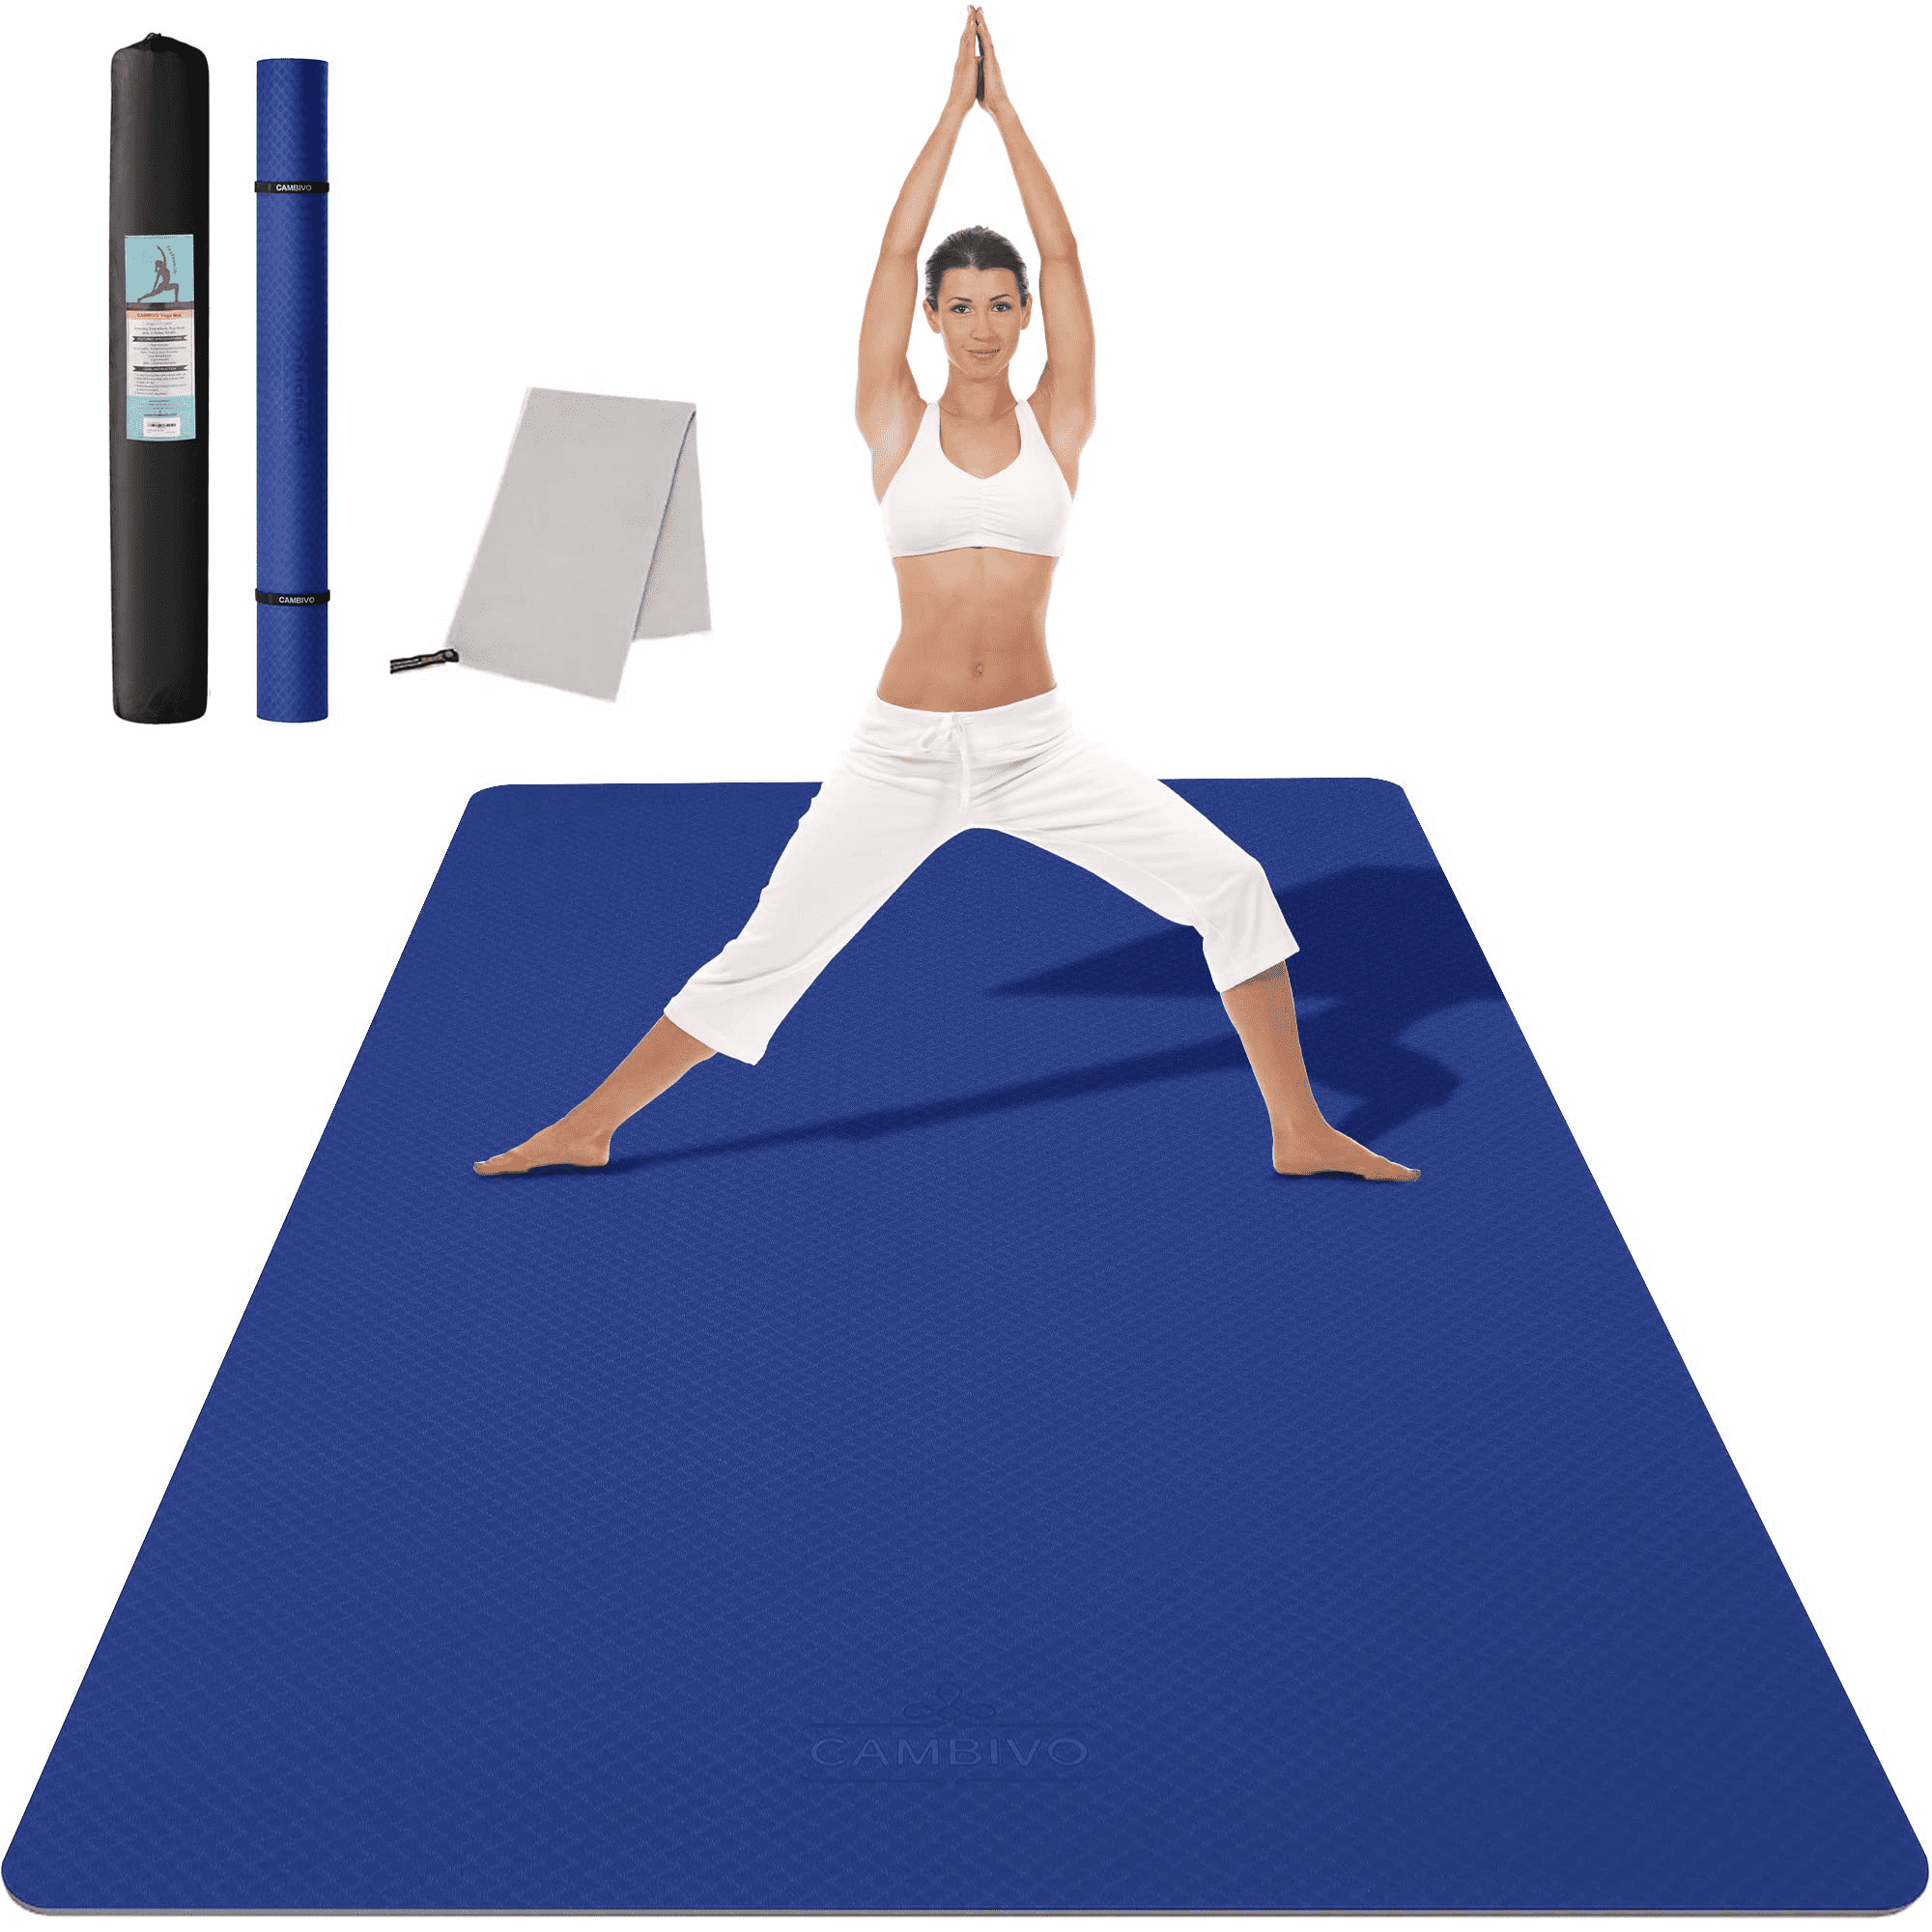 Deluxe Studio Extra Thick Yoga Mat - Best Quality 6mm Mat